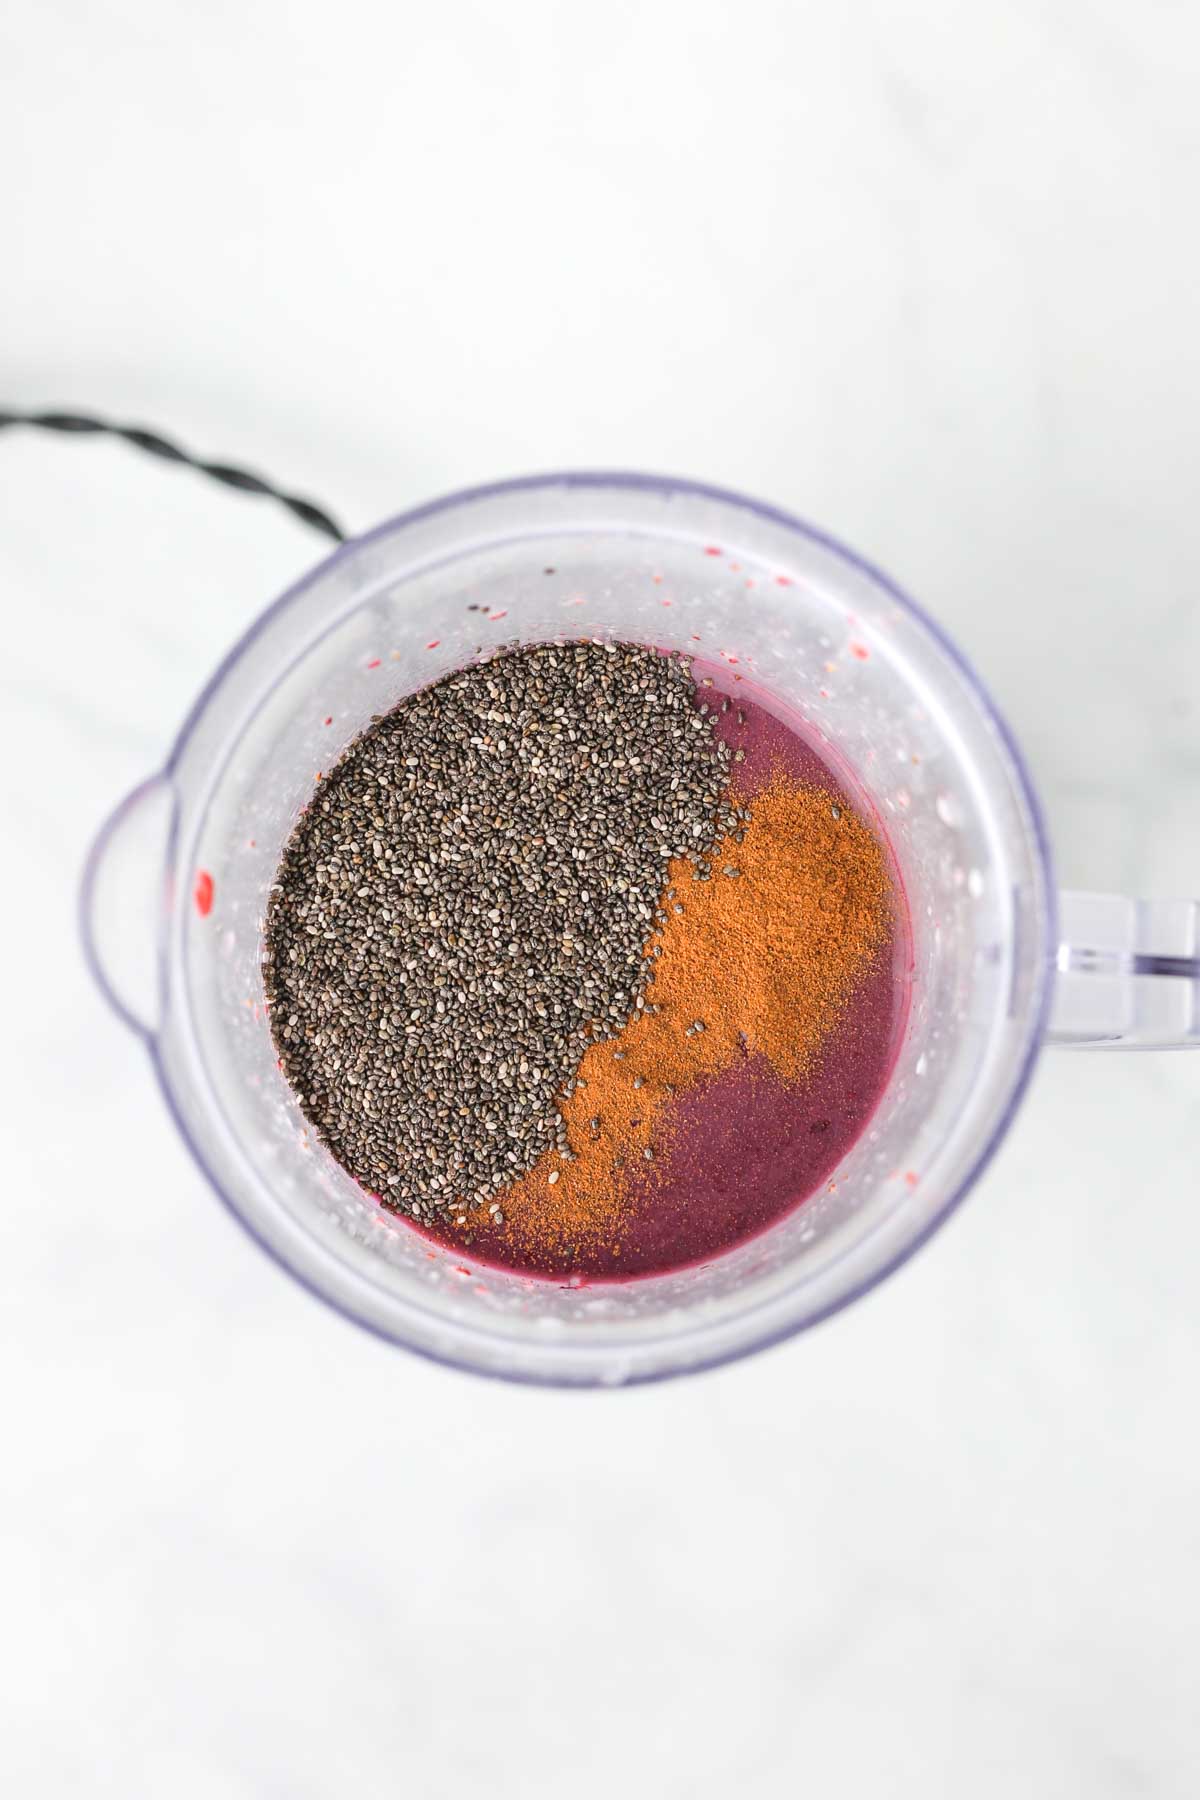 adding the chia seeds and ground cinnamon to the smoothie in the blender.